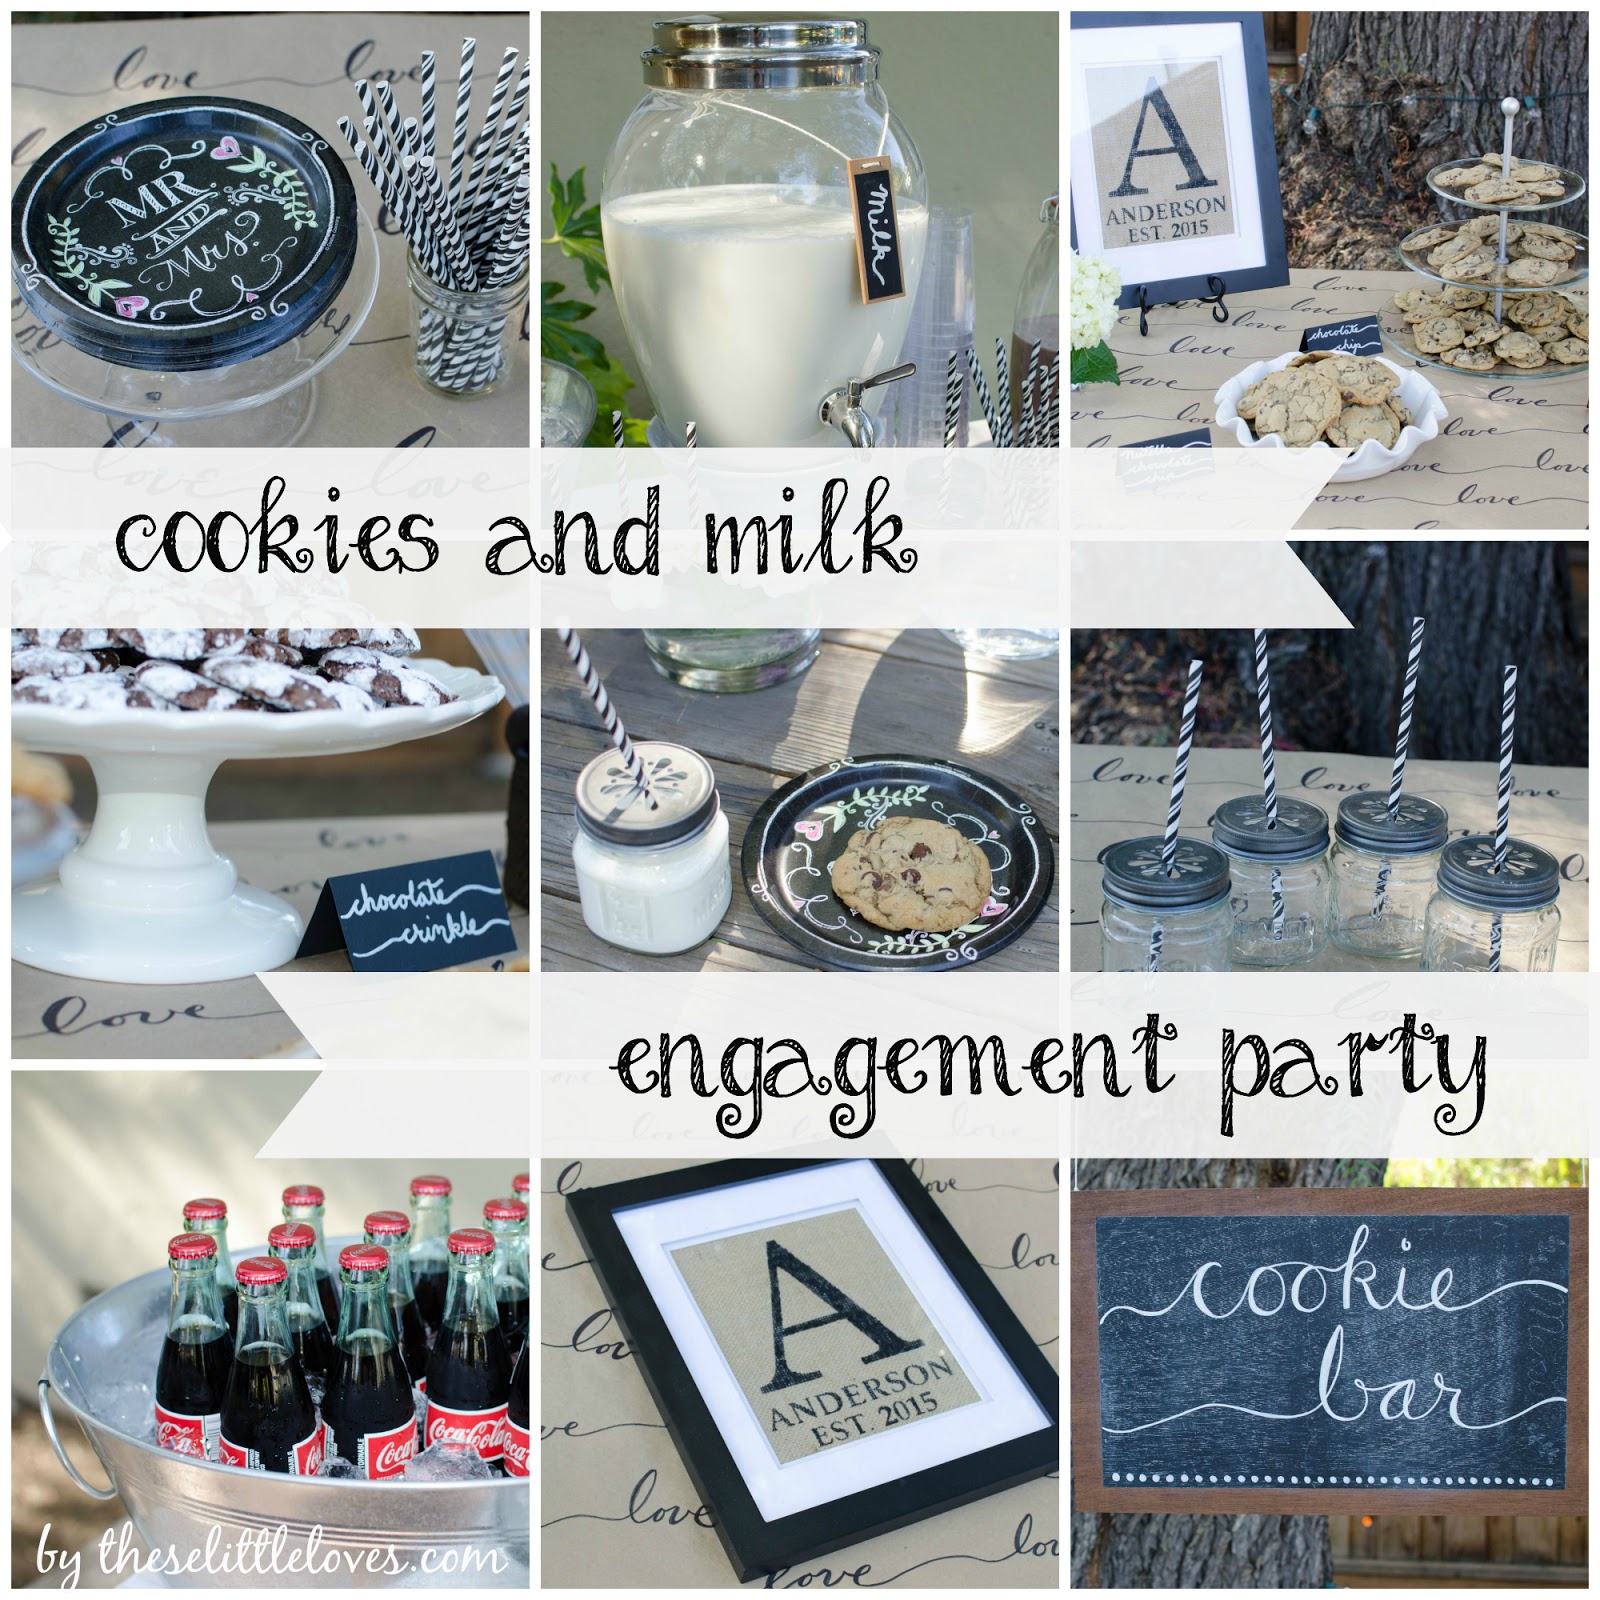 A Milk and Cookies Engagement Party